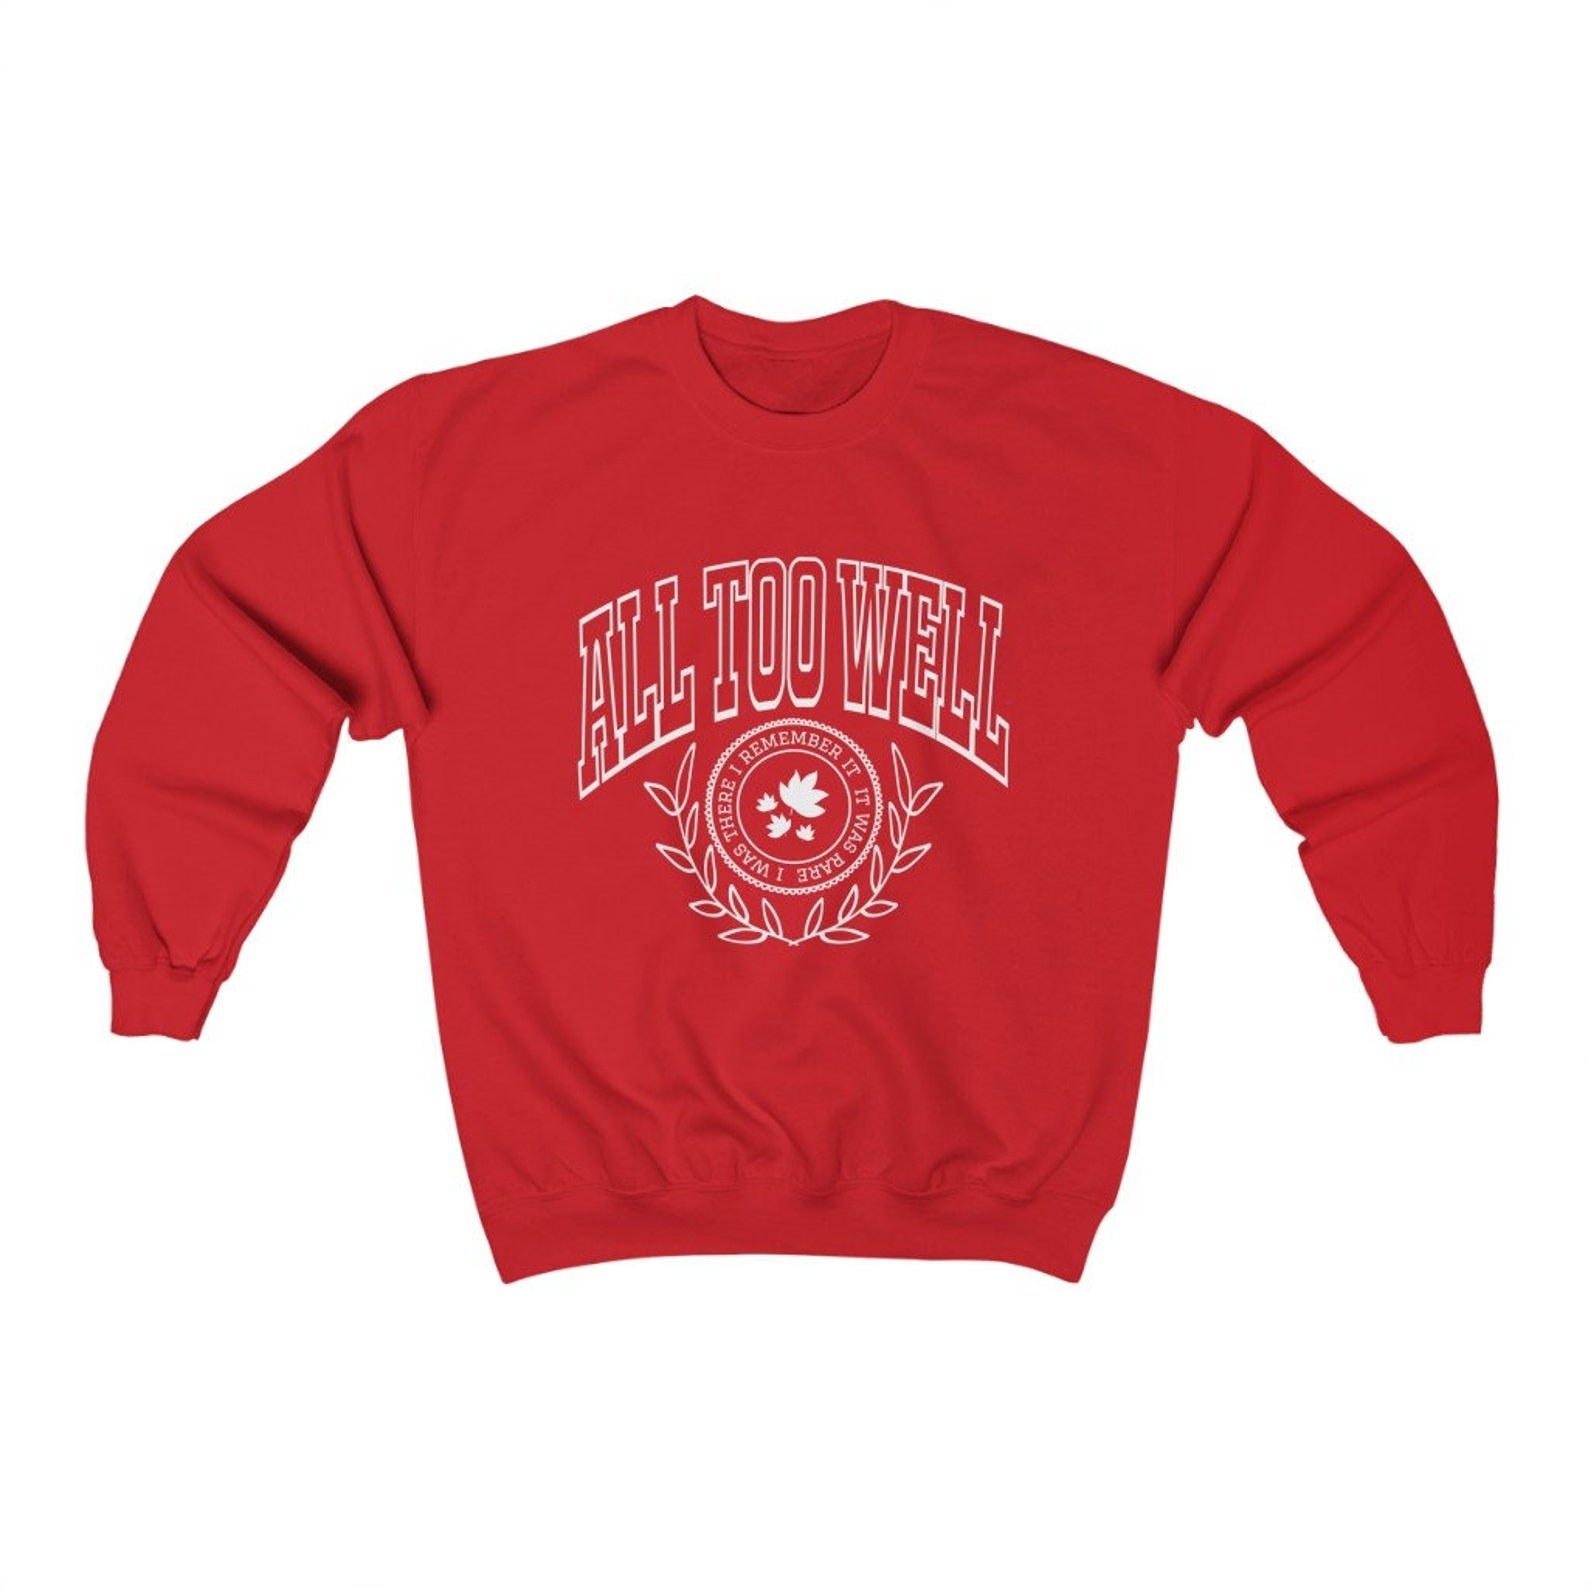 a red sweatshirt that says &quot;all too well&quot; on it